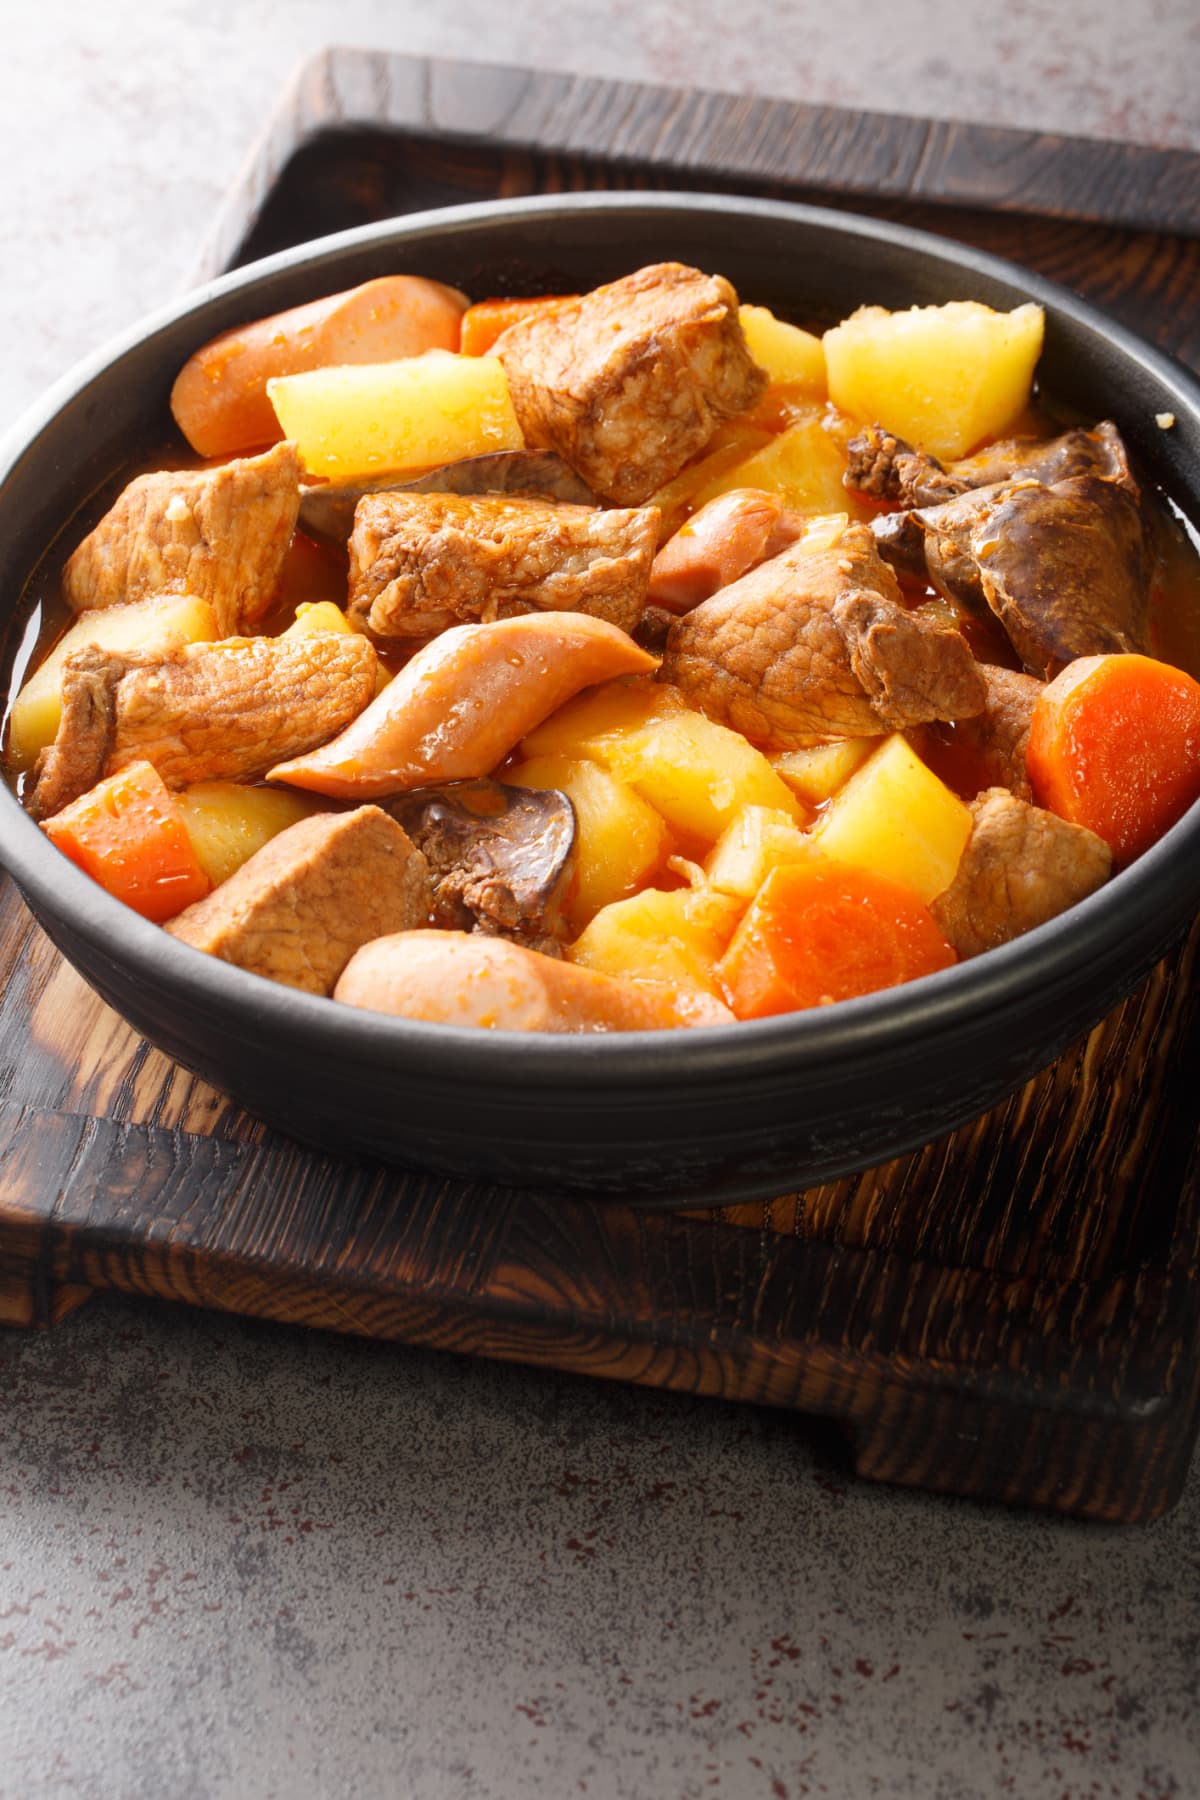 Pork Menudo is a Filipino pork stew dish with carrots and potato close up in the plate on the table. Vertical